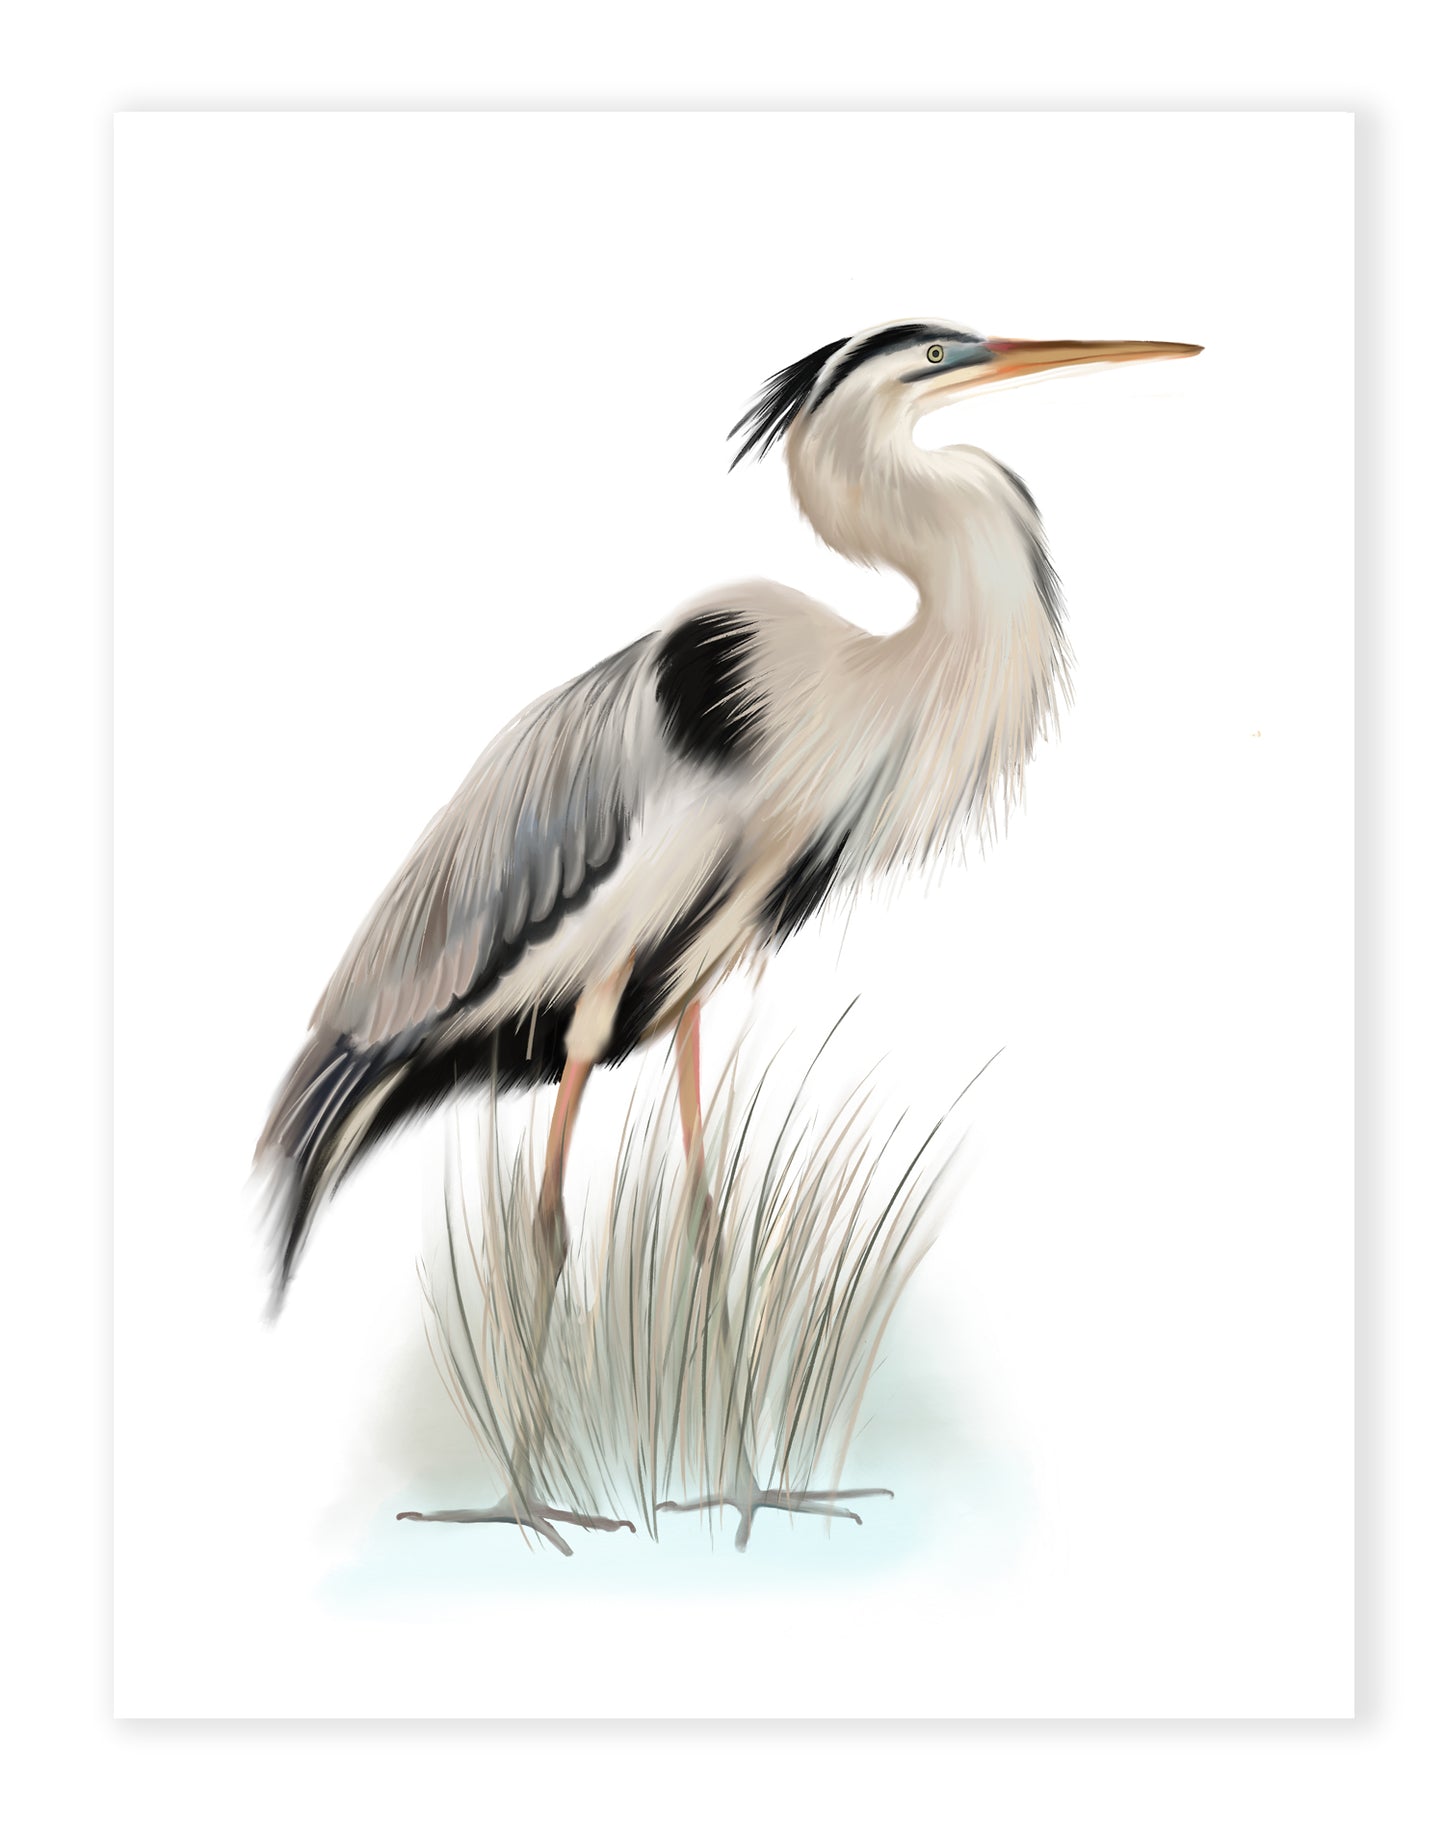 Painting of a Great Blue Heron bird in green grasses on a white background - Studio Q - Art by Nicky Quartermaine Scott